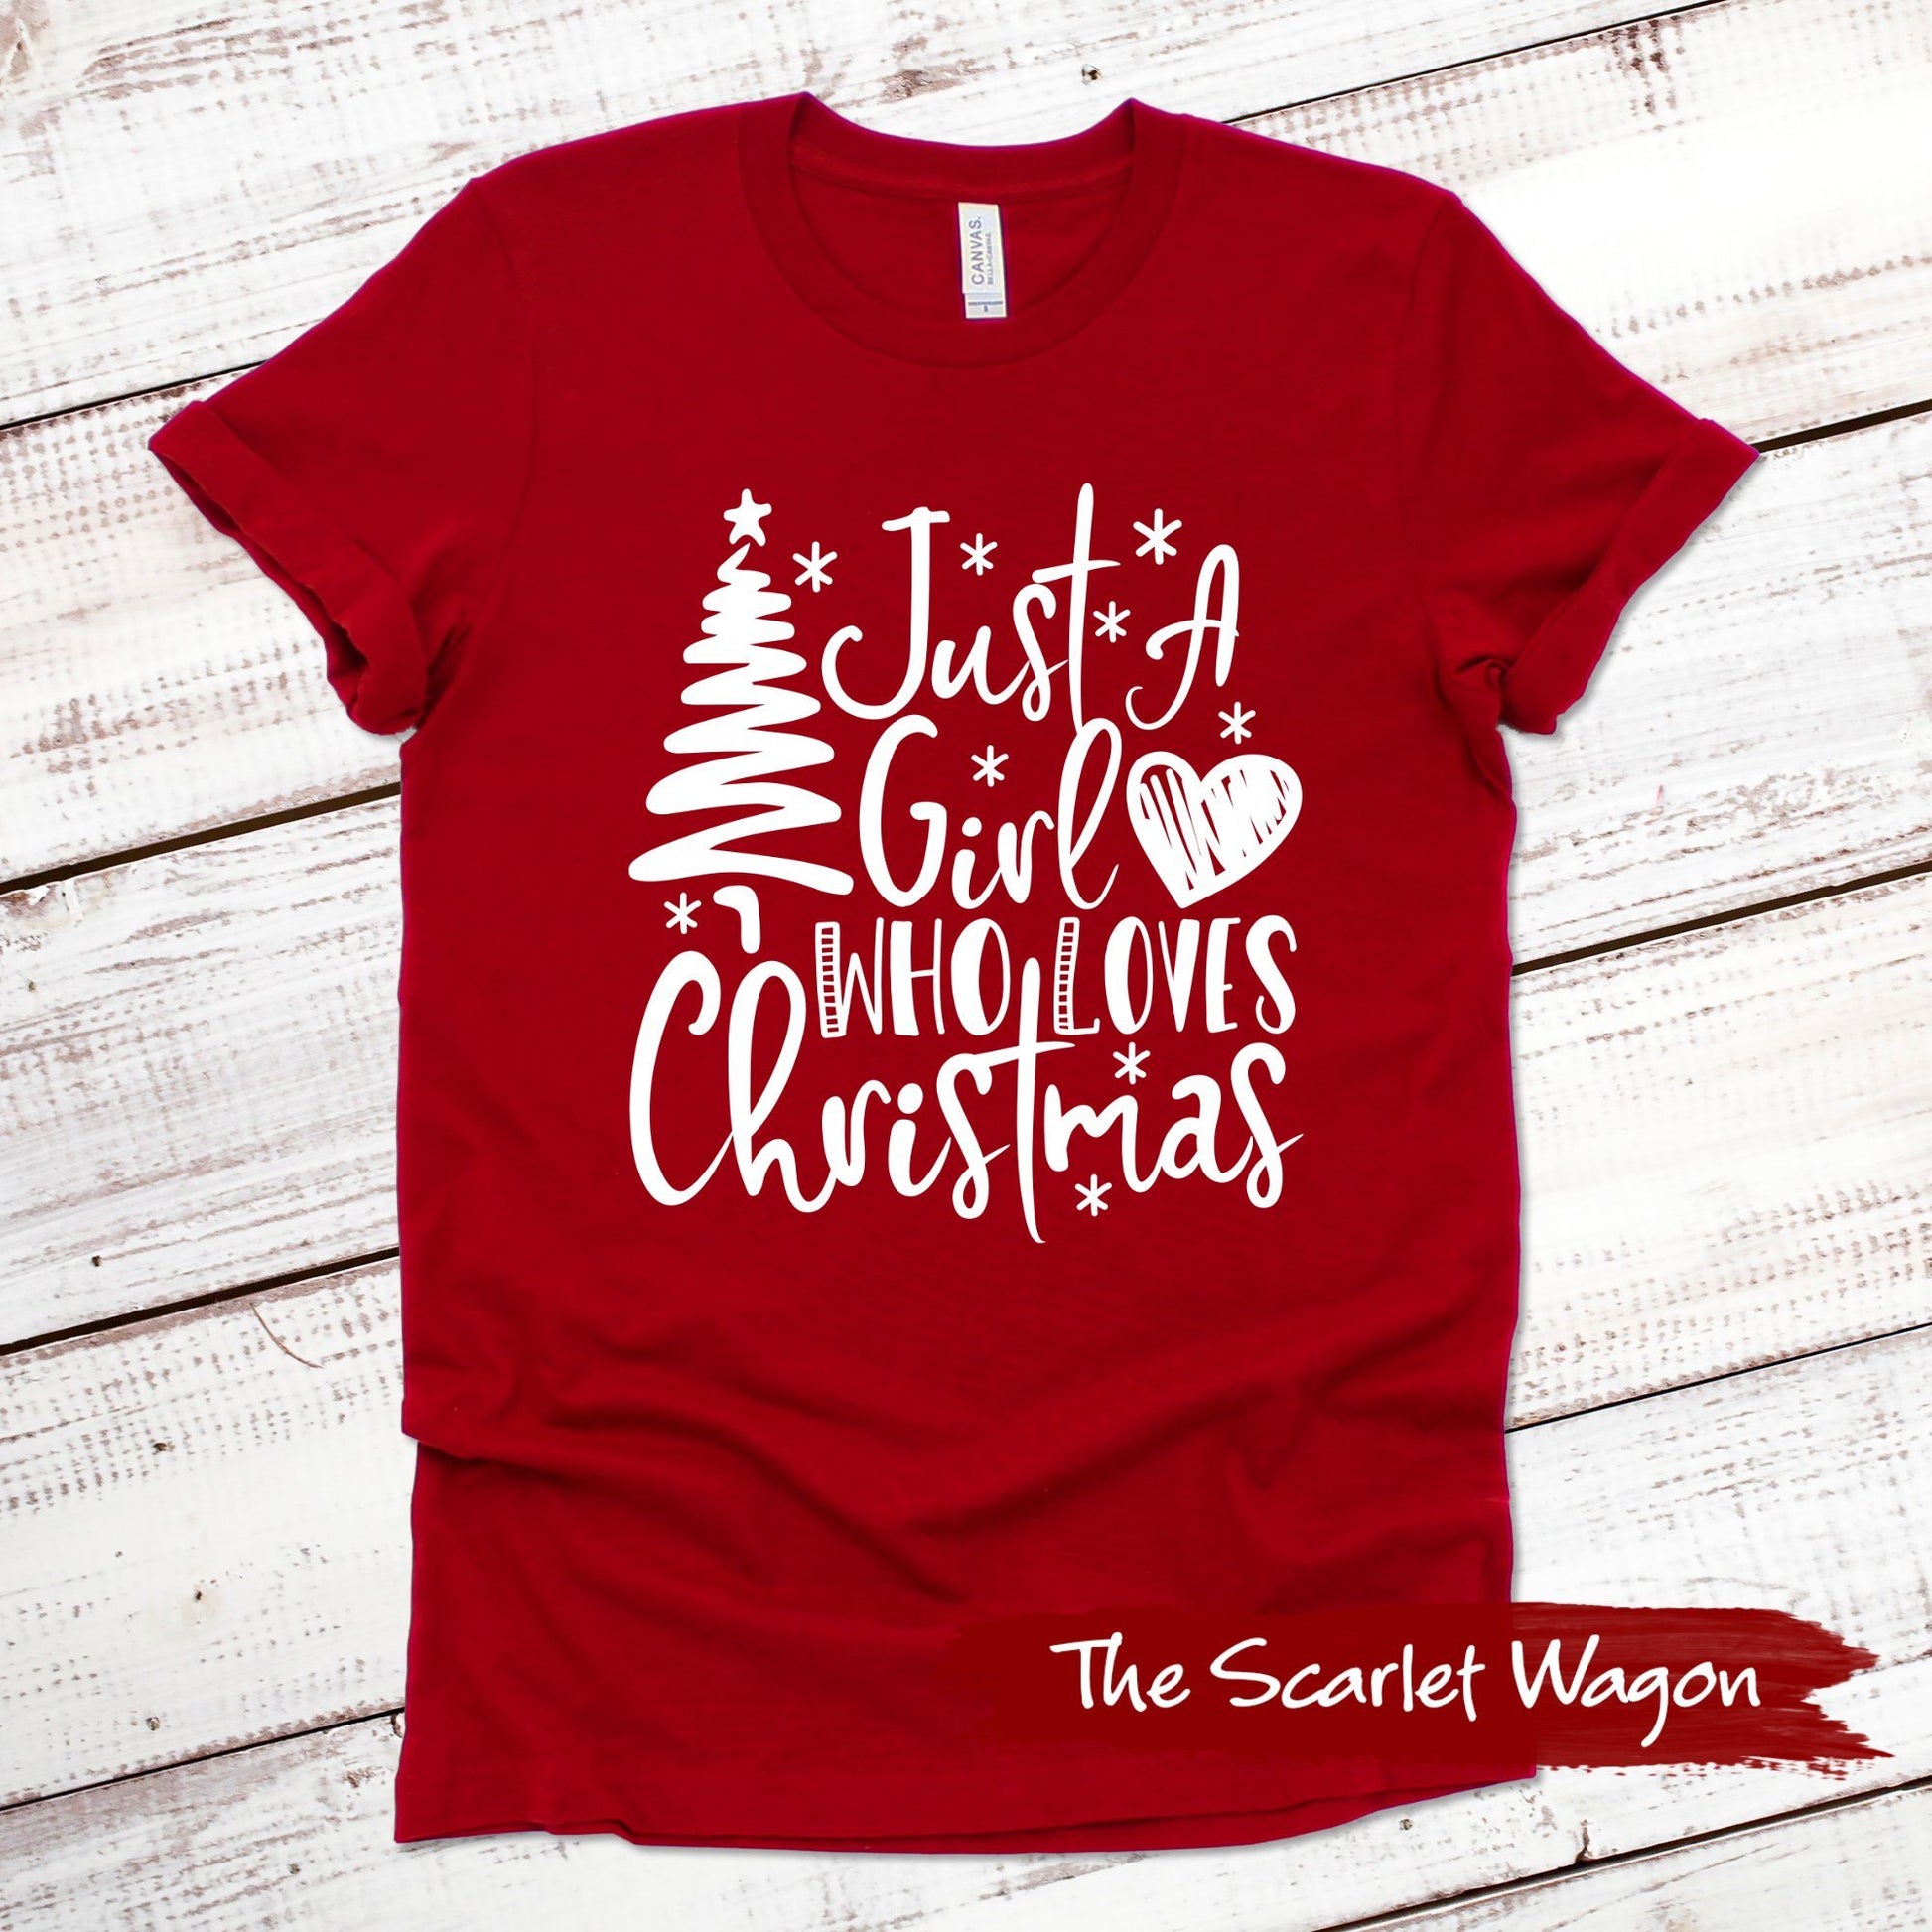 Just a Girl Who Loves Christmas Christmas Shirt Scarlet Wagon Red XS 